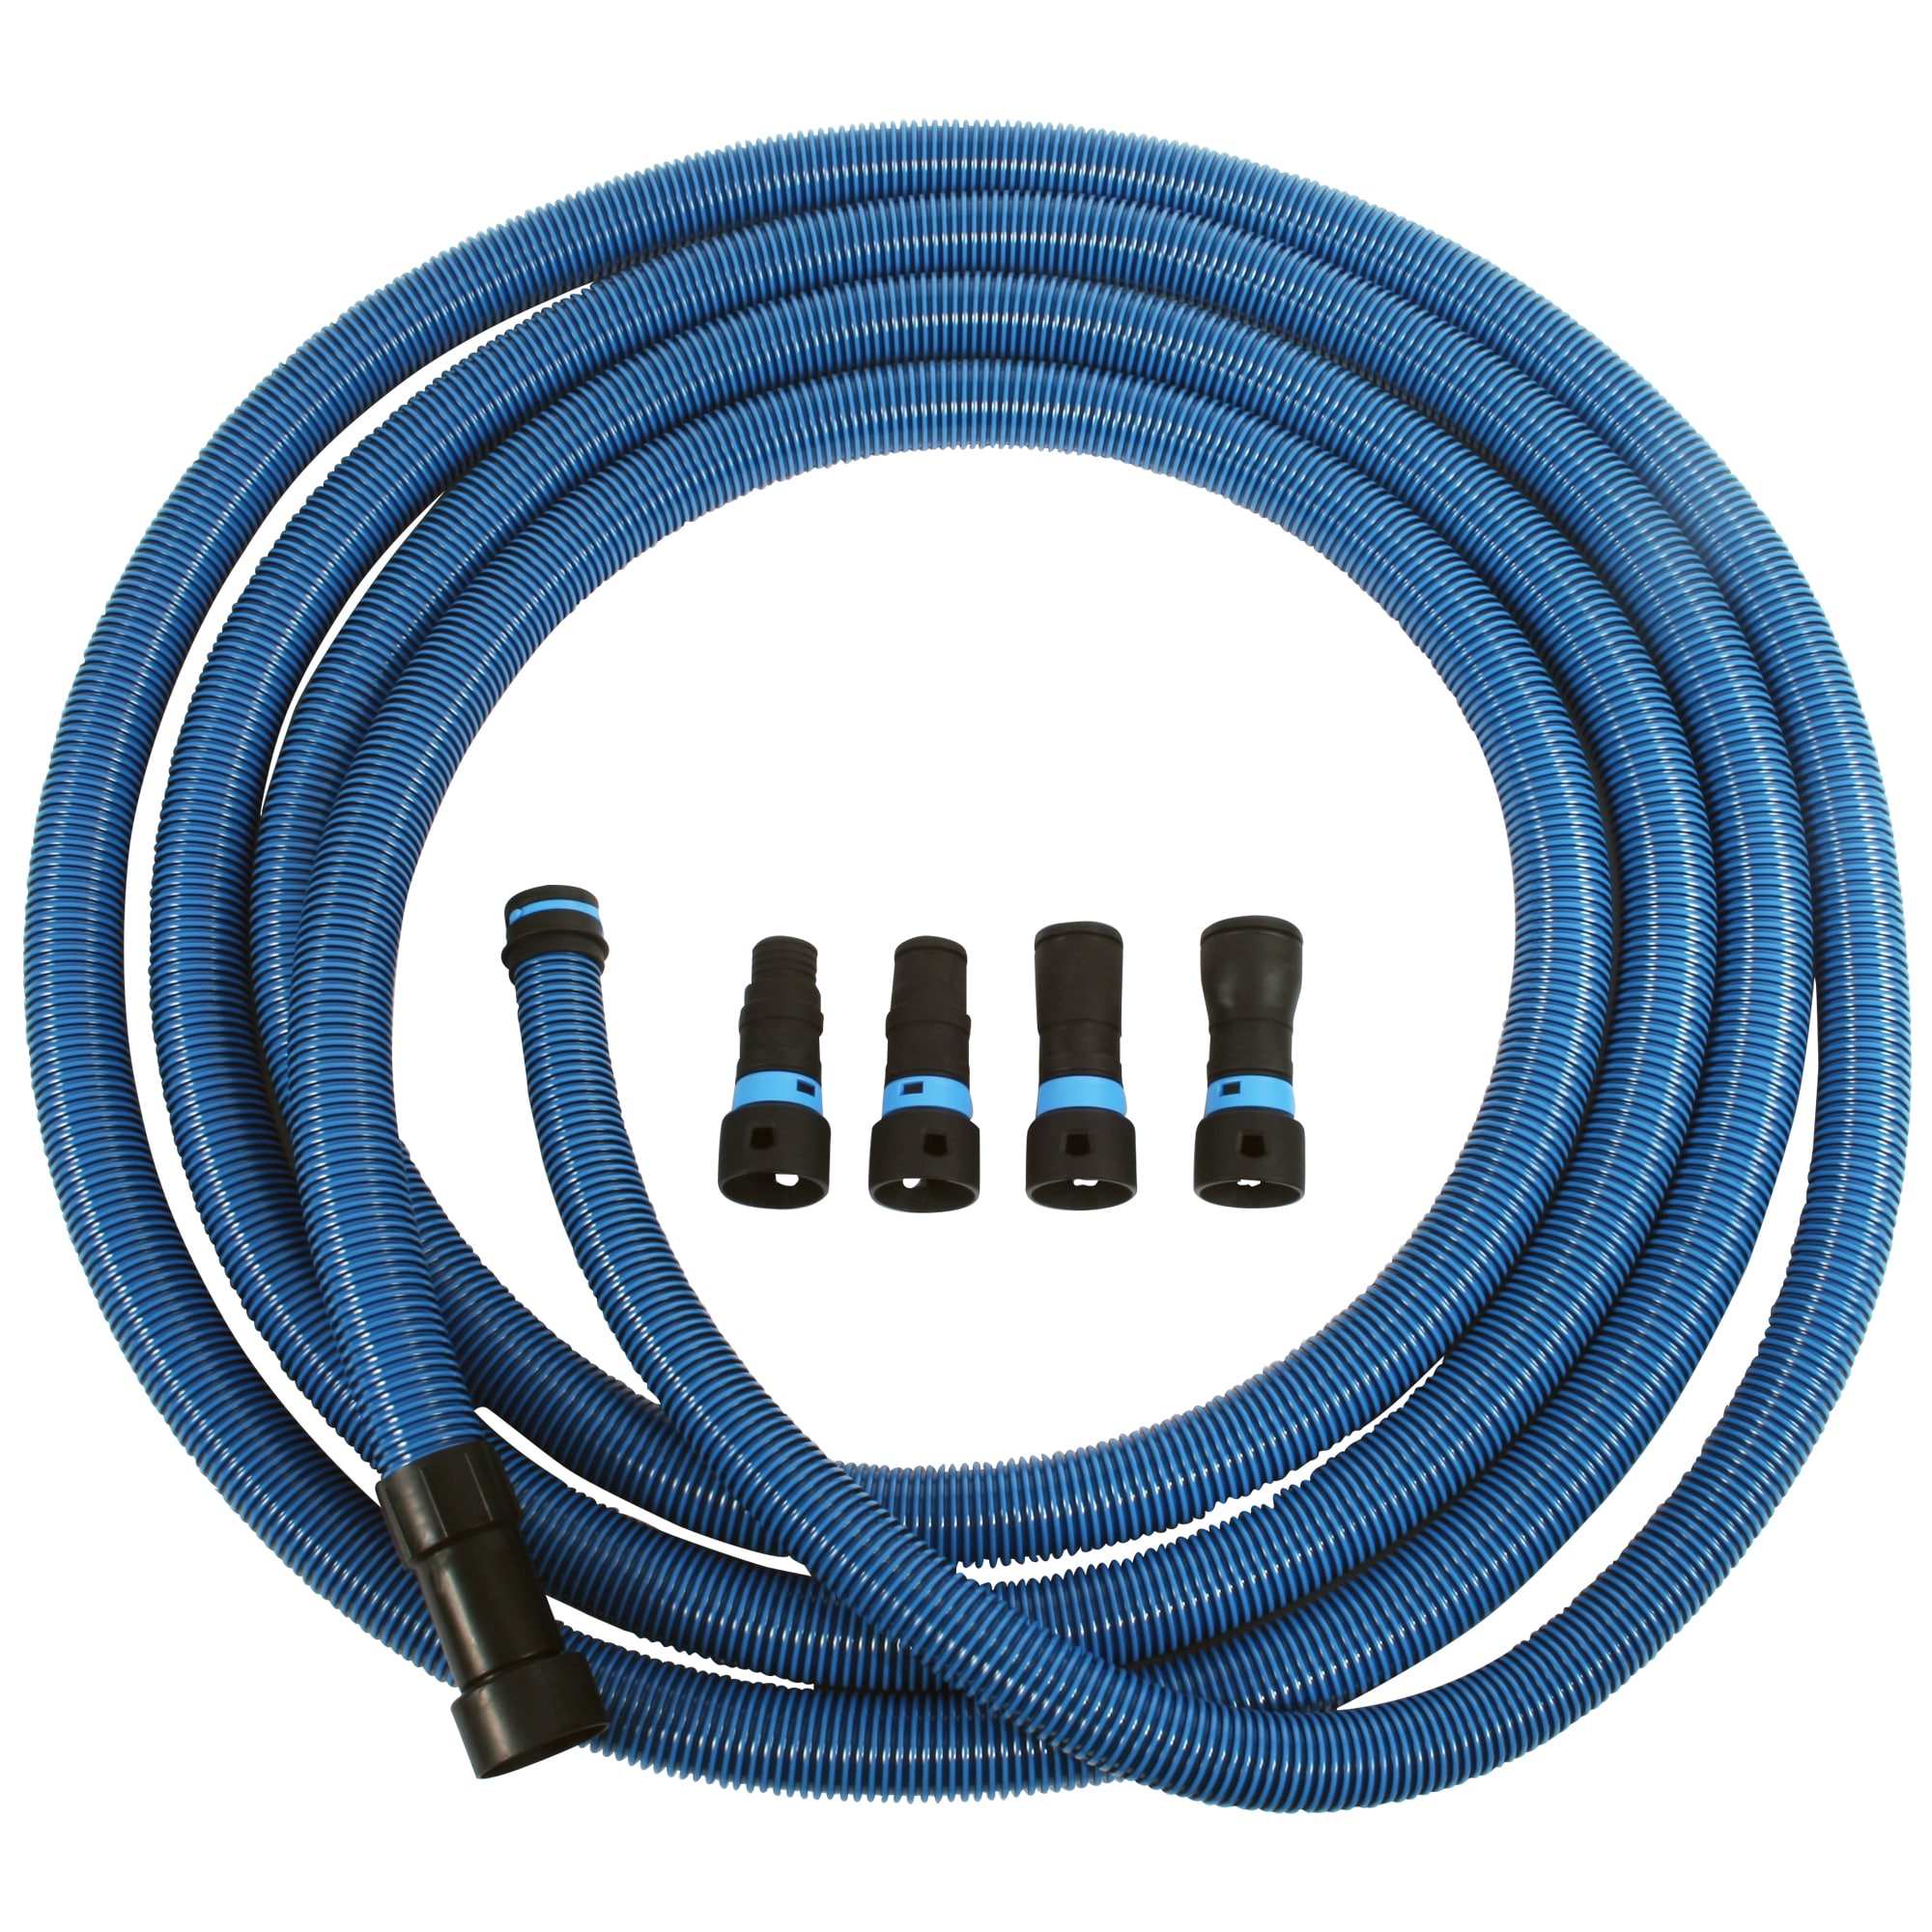 Cen-Tec Systems 94181 Quick Click 10 ft. Hose for Home and Shop Vacuums with Multi-Brand Power Tool Adapter for Dust Collection